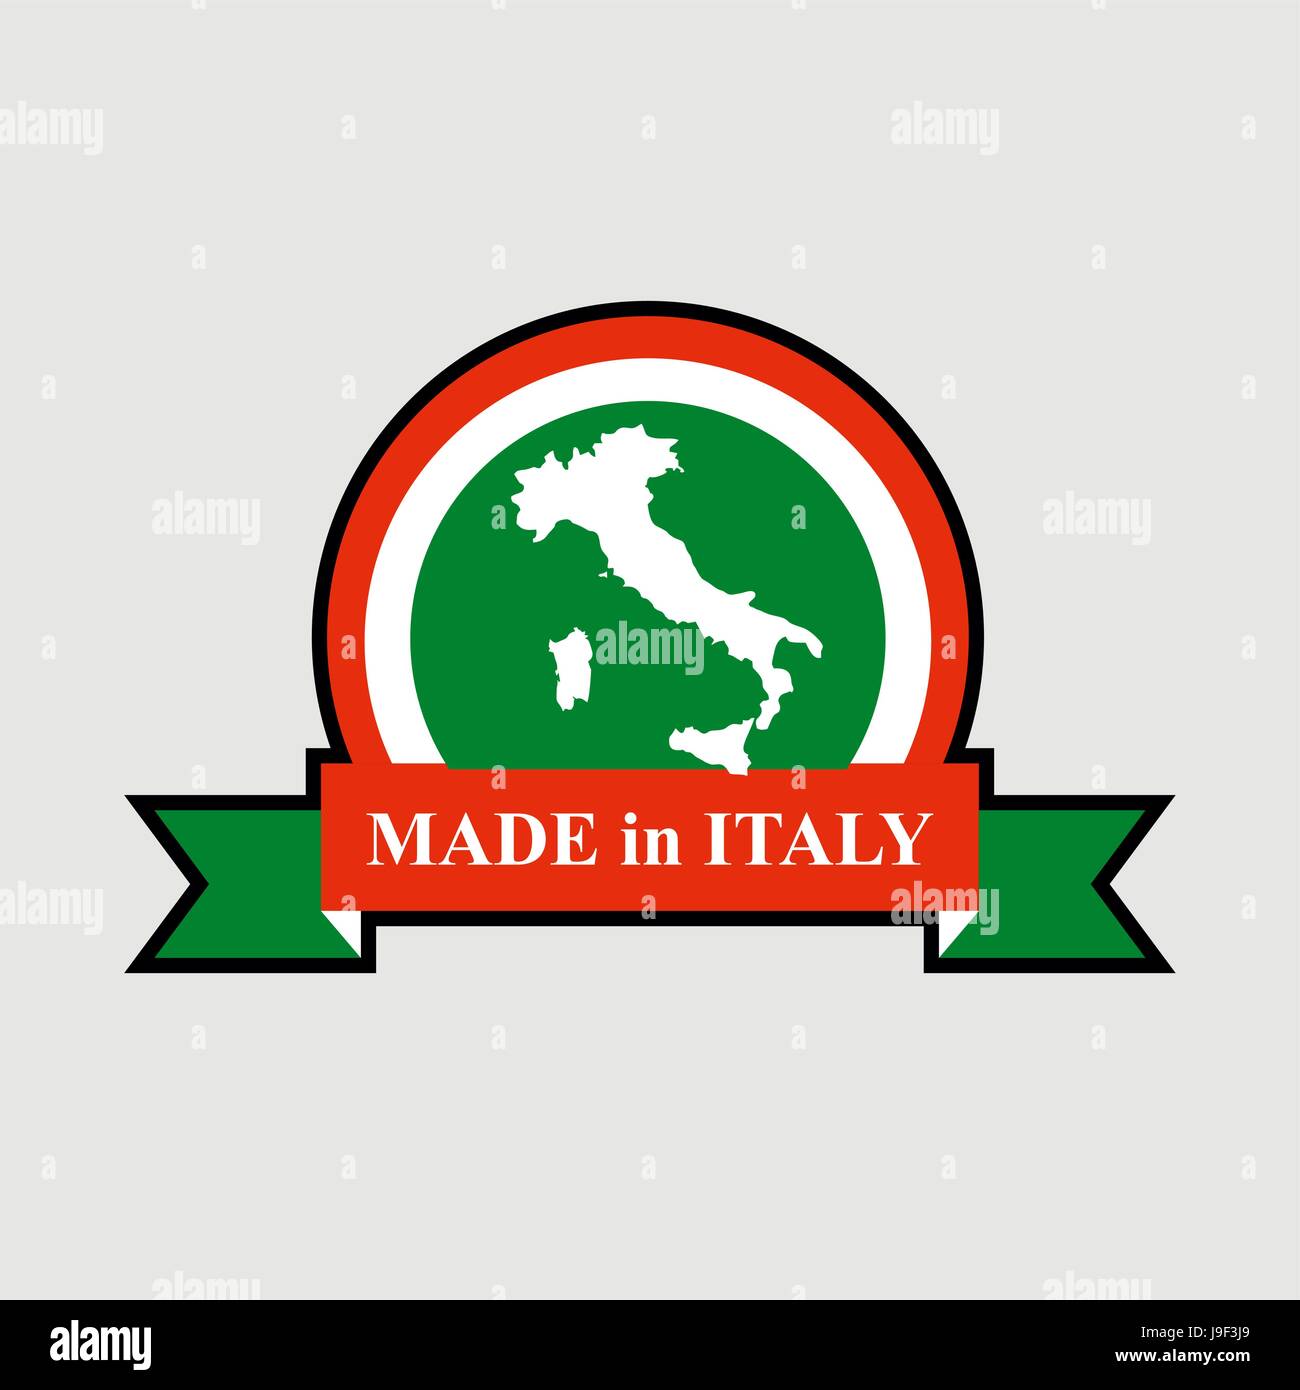 Made in Italy product logo. Map of Italy and Ribbon with colors of Italian flag. Label template for production. Stock Vector